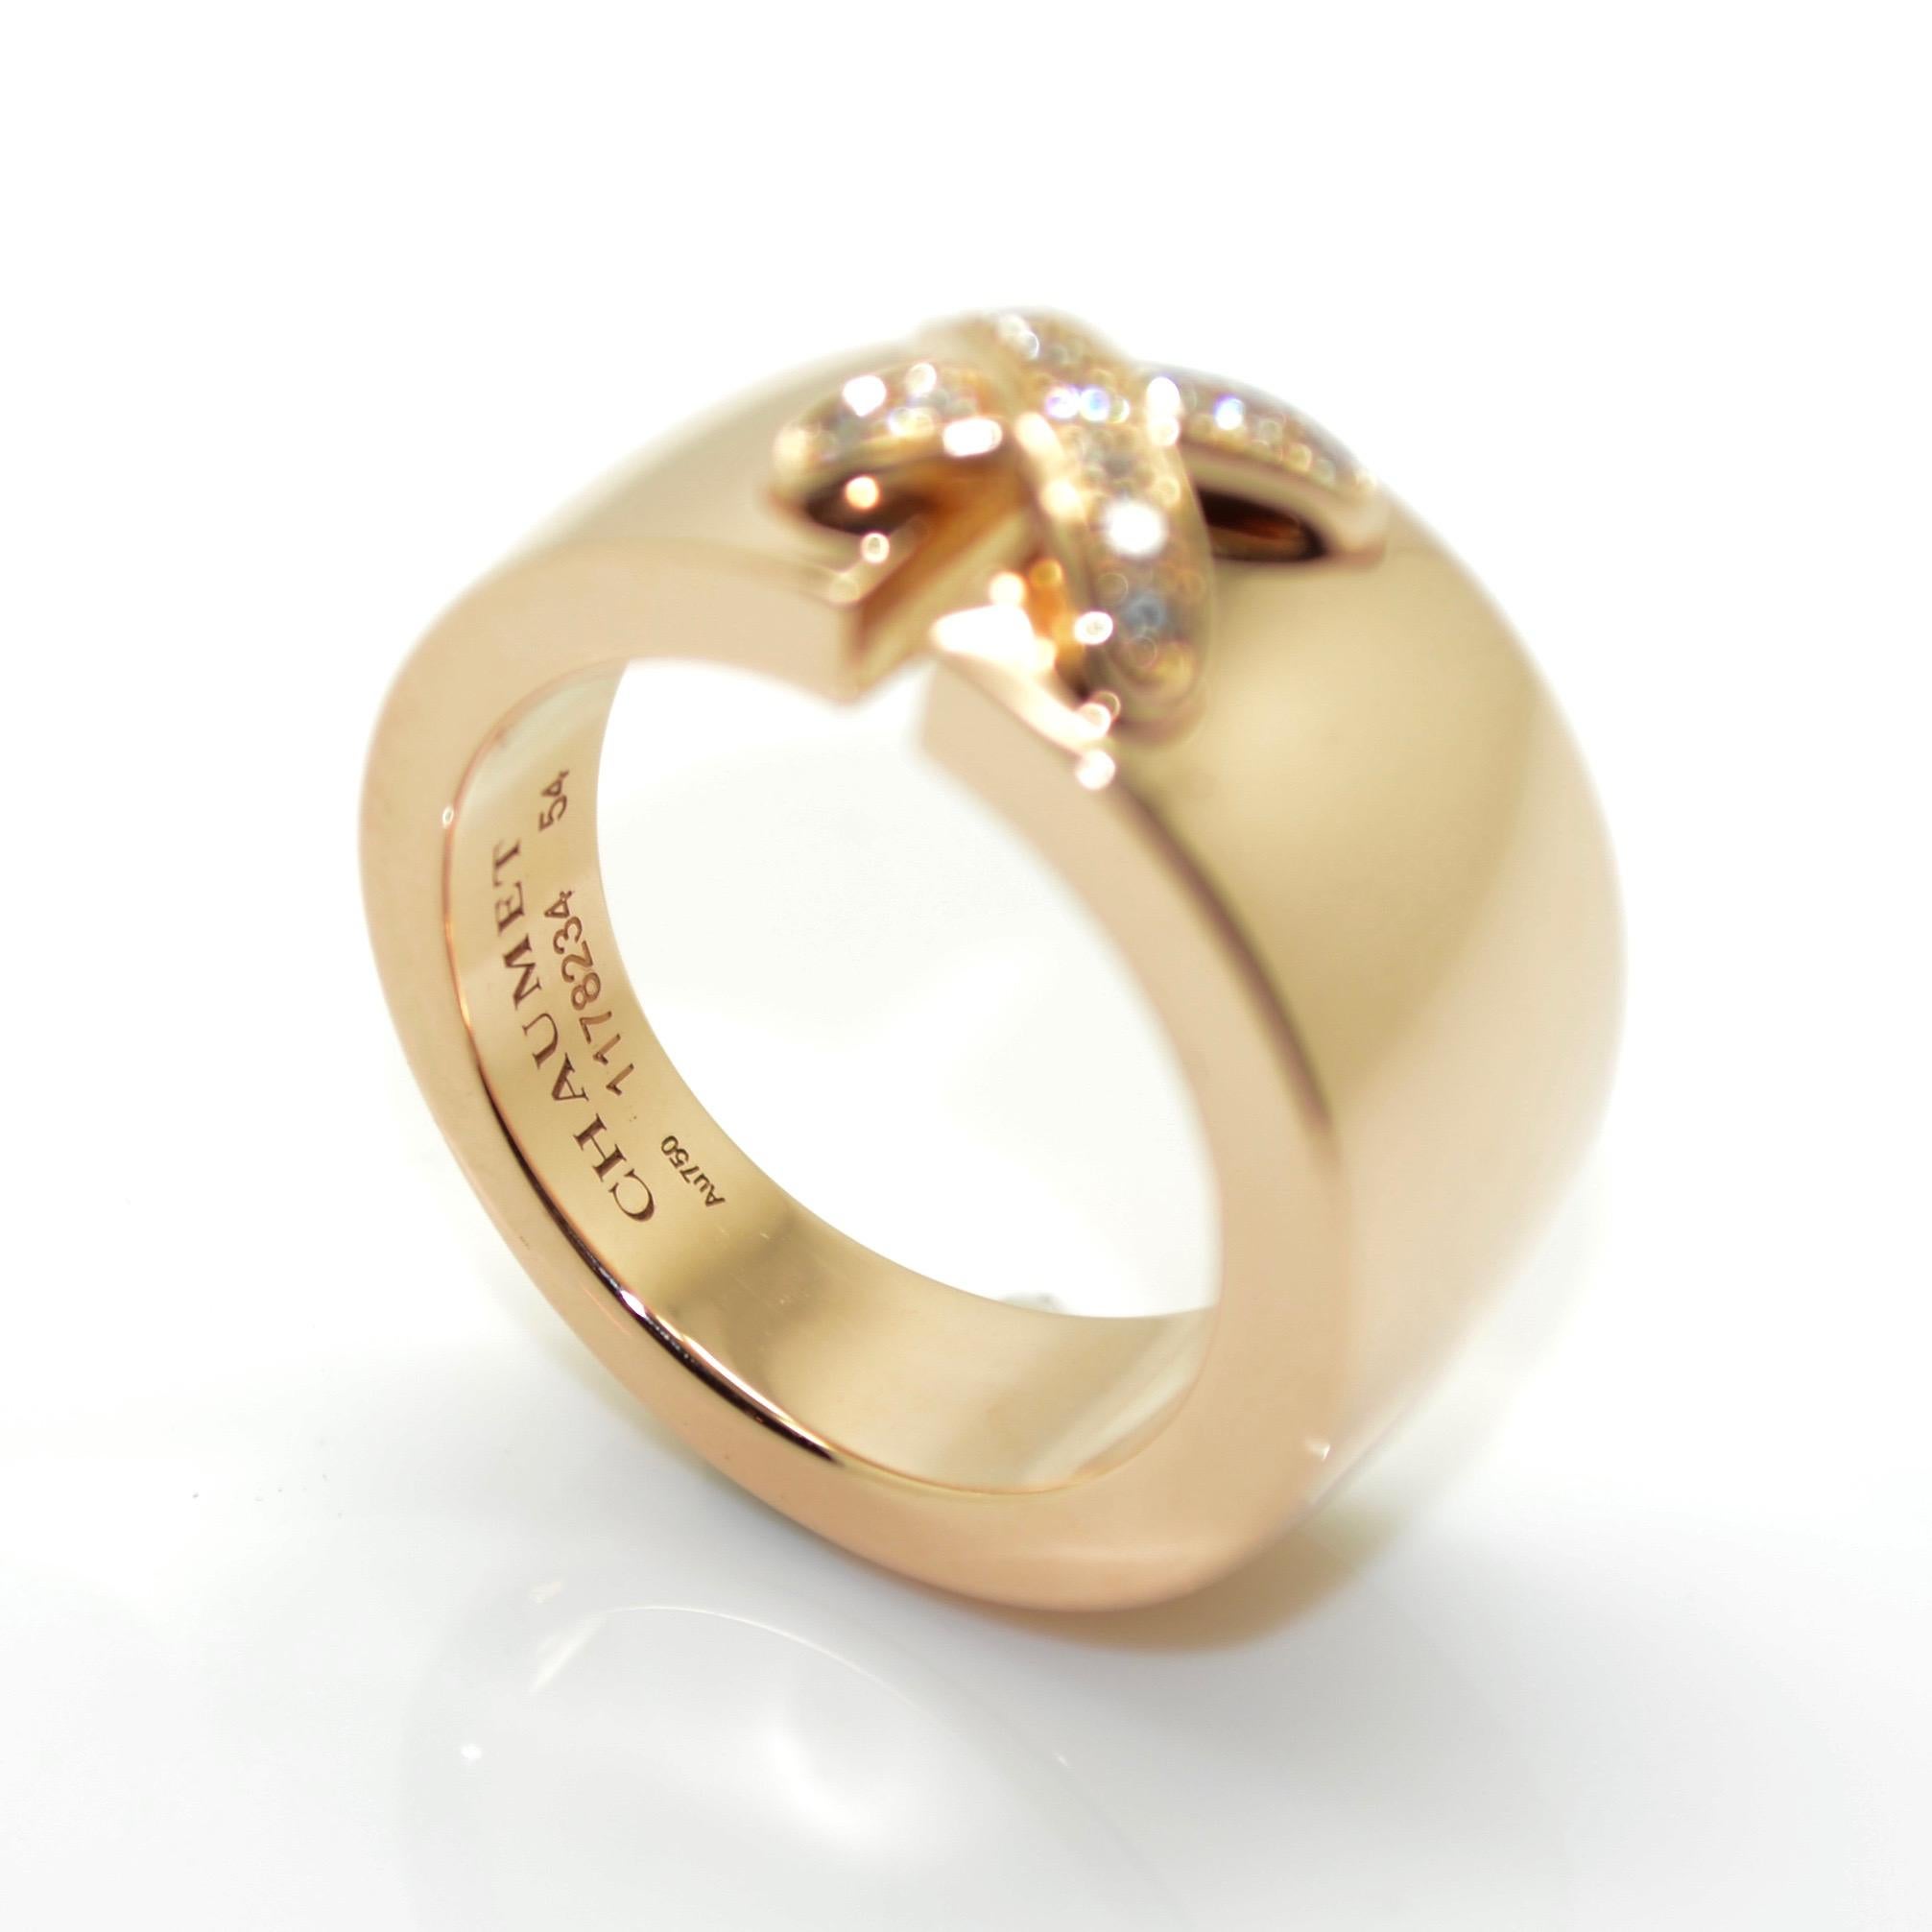 Modern Chaumet 18 Karat Pink Gold and Diamonds Ring For Sale